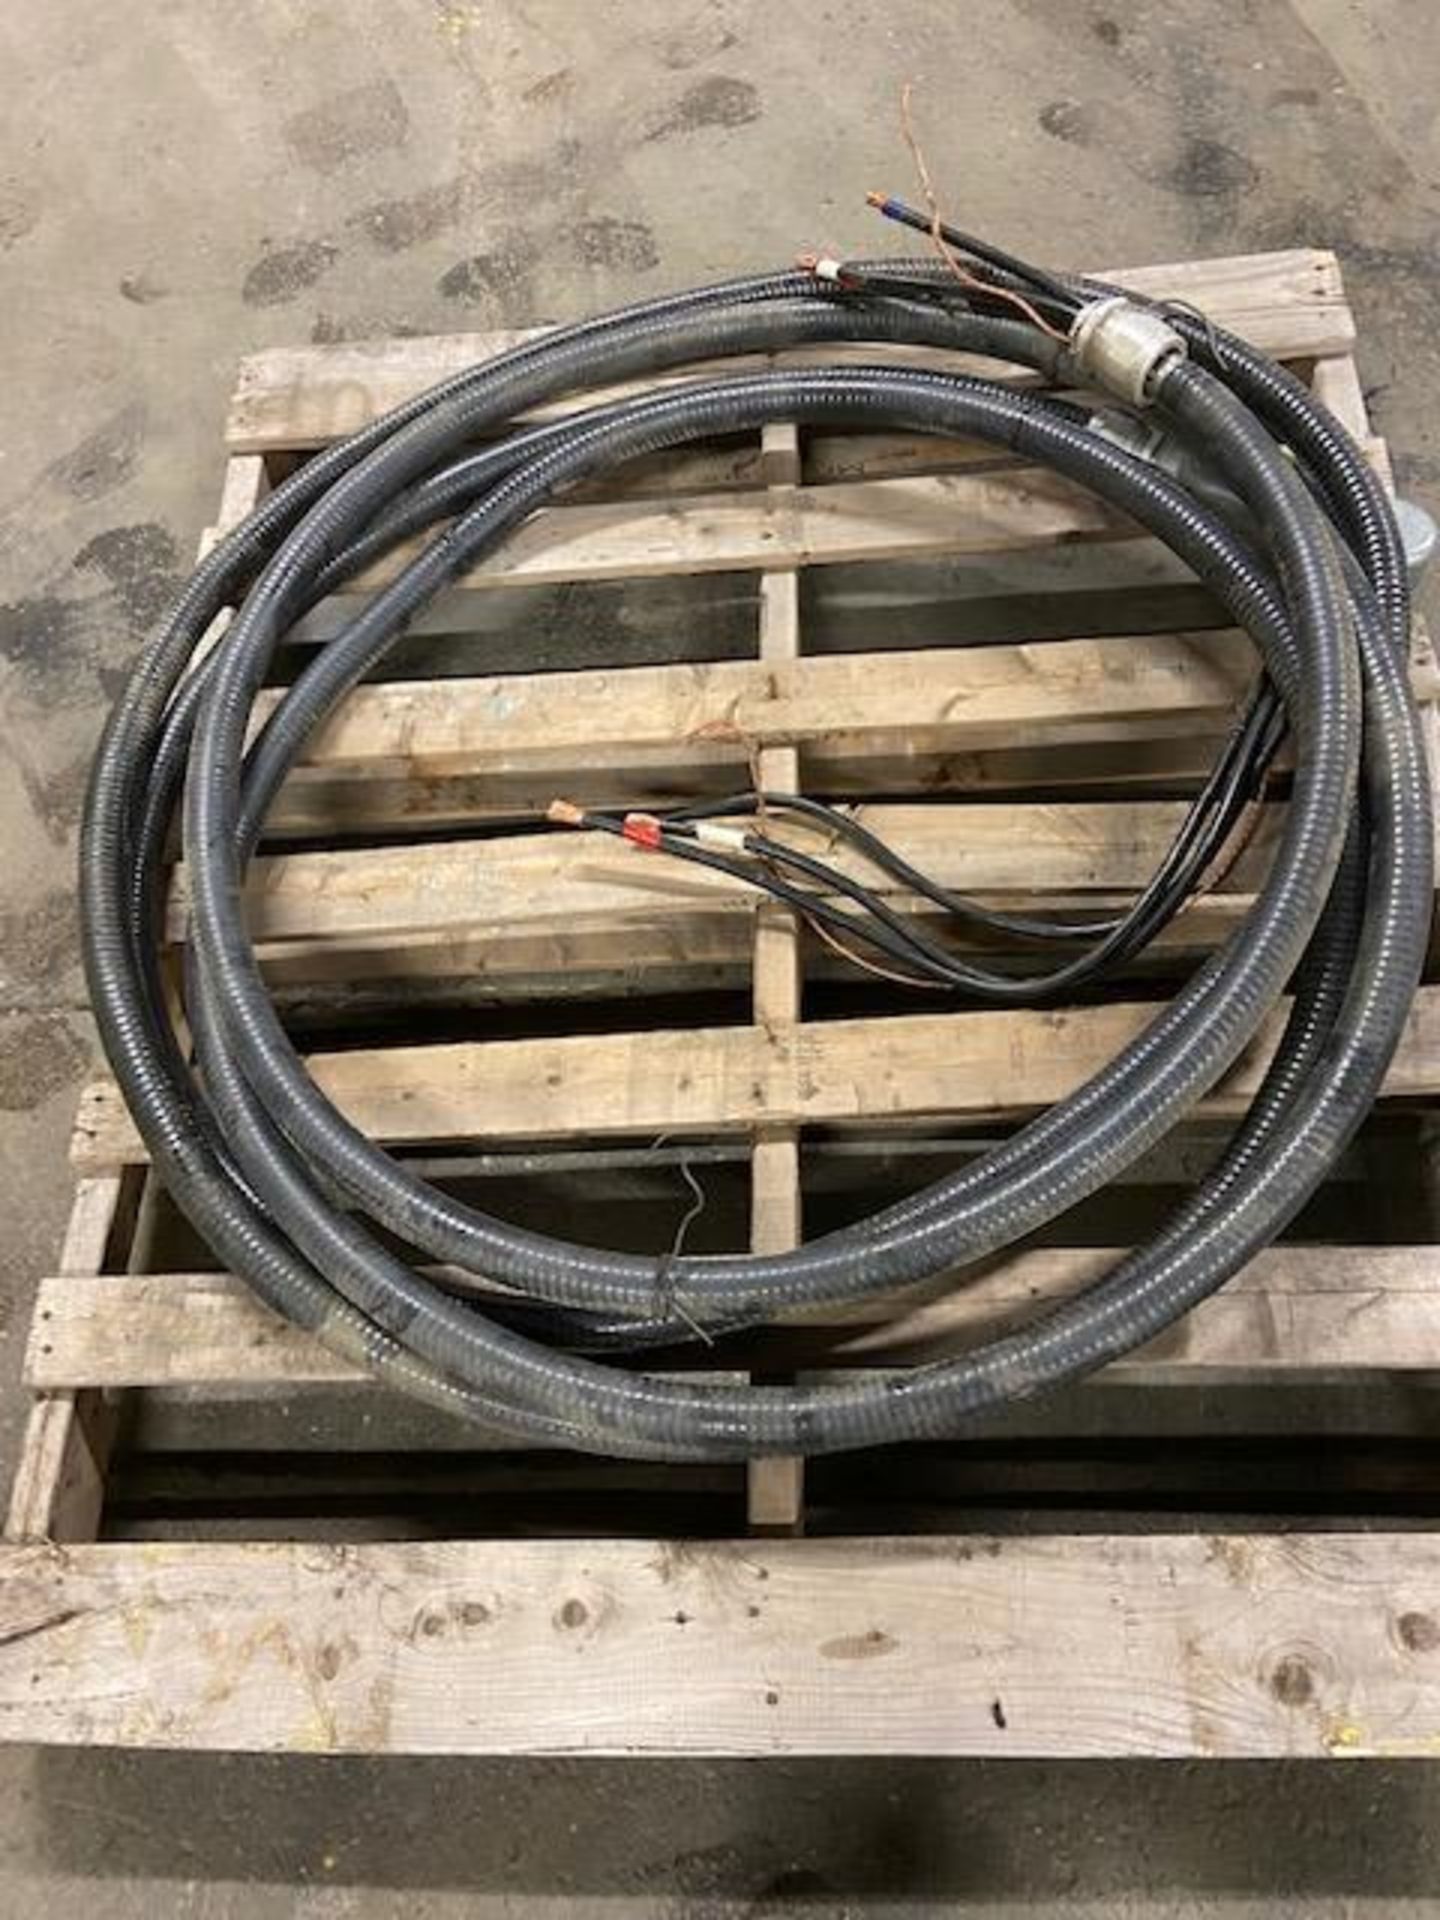 Heavy Duty Electrical Cable 3 wires - 45 feet long